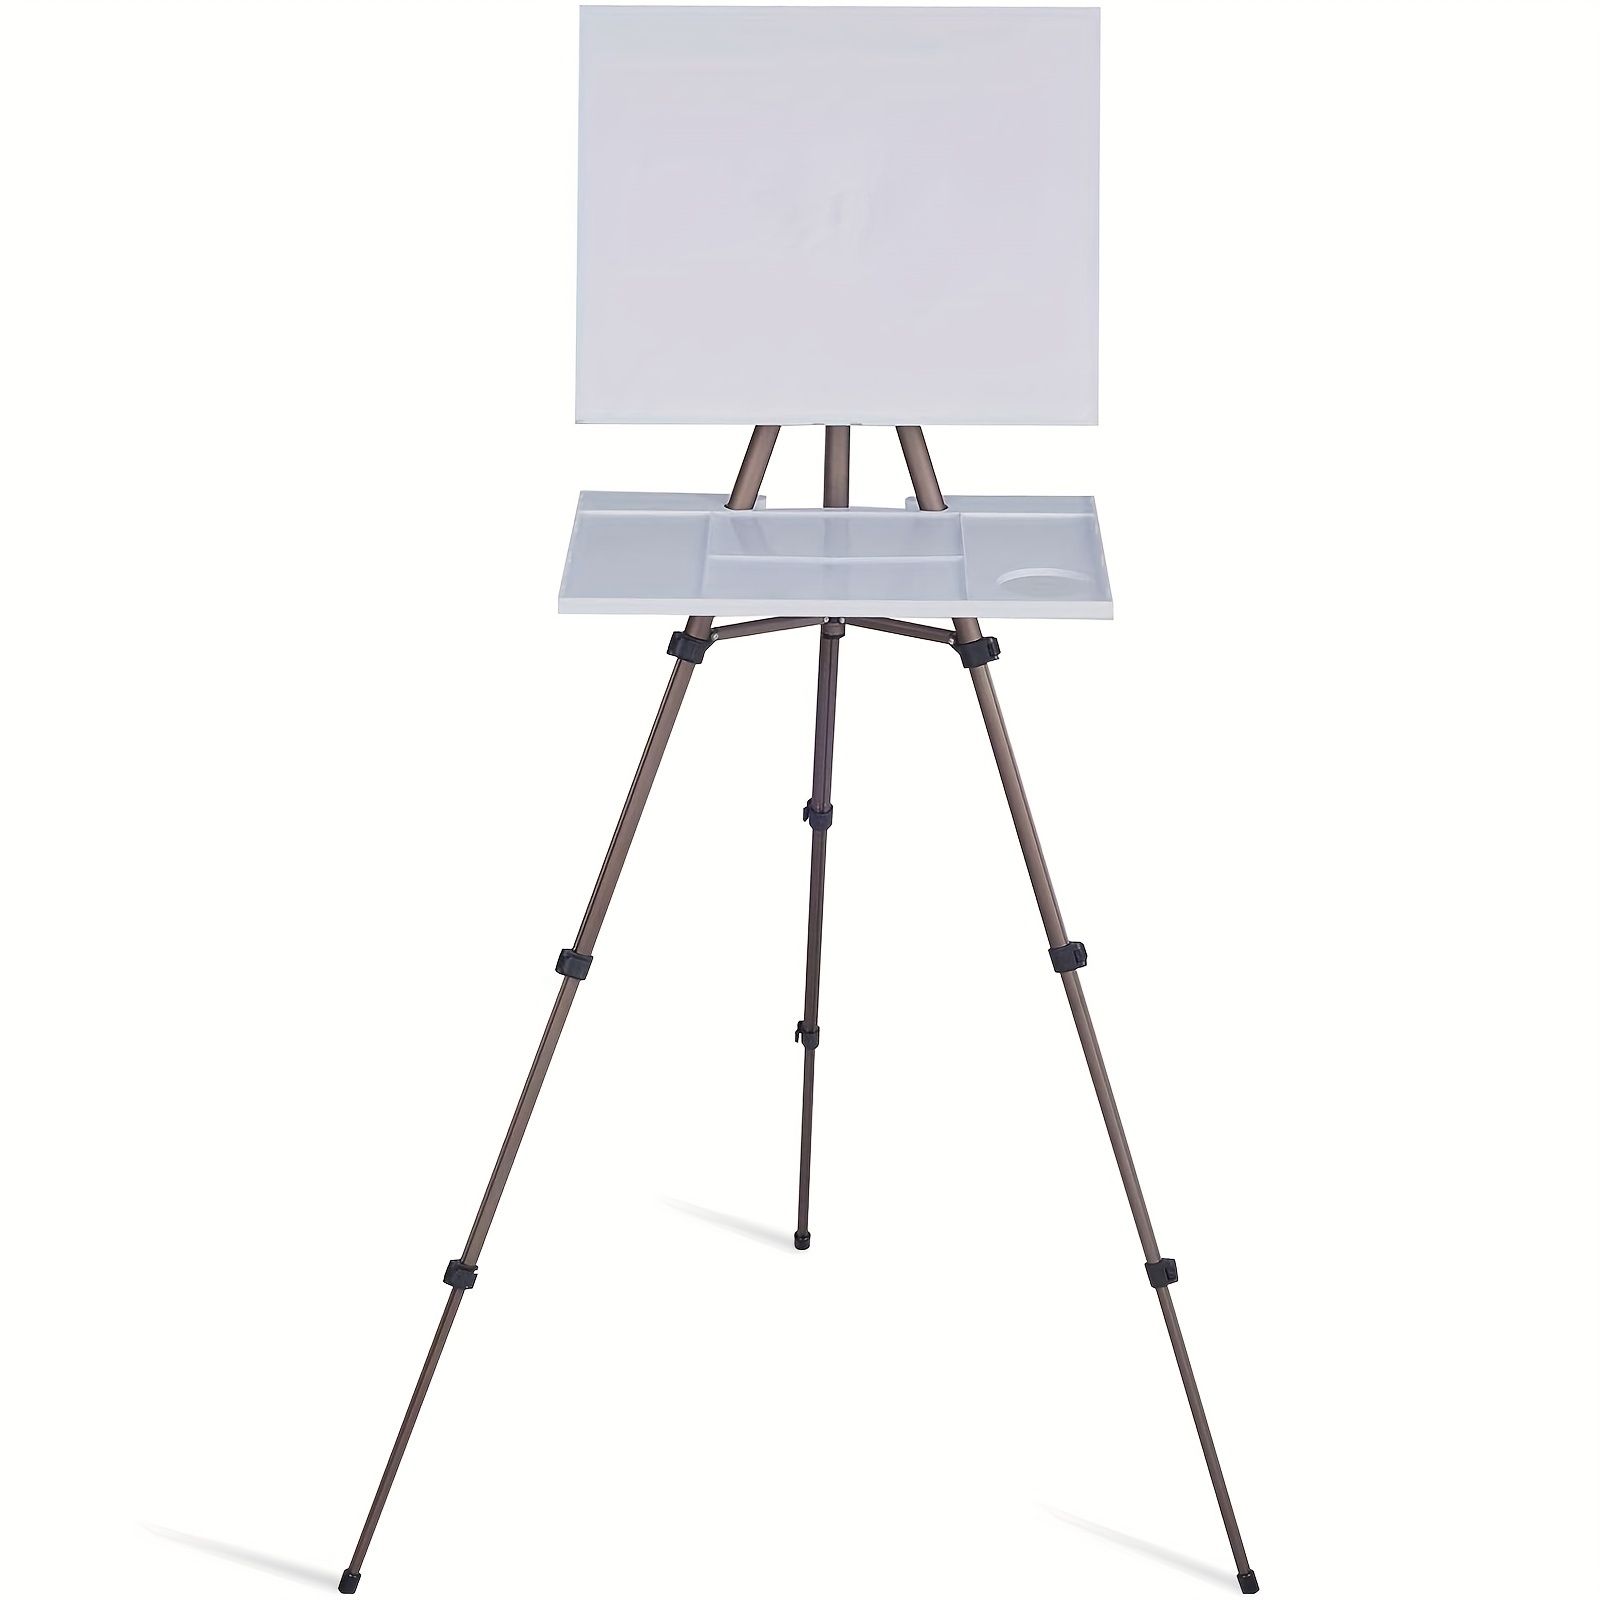 MEEDEN Tabletop Easels, Metal Easel Stand for Painting & Display